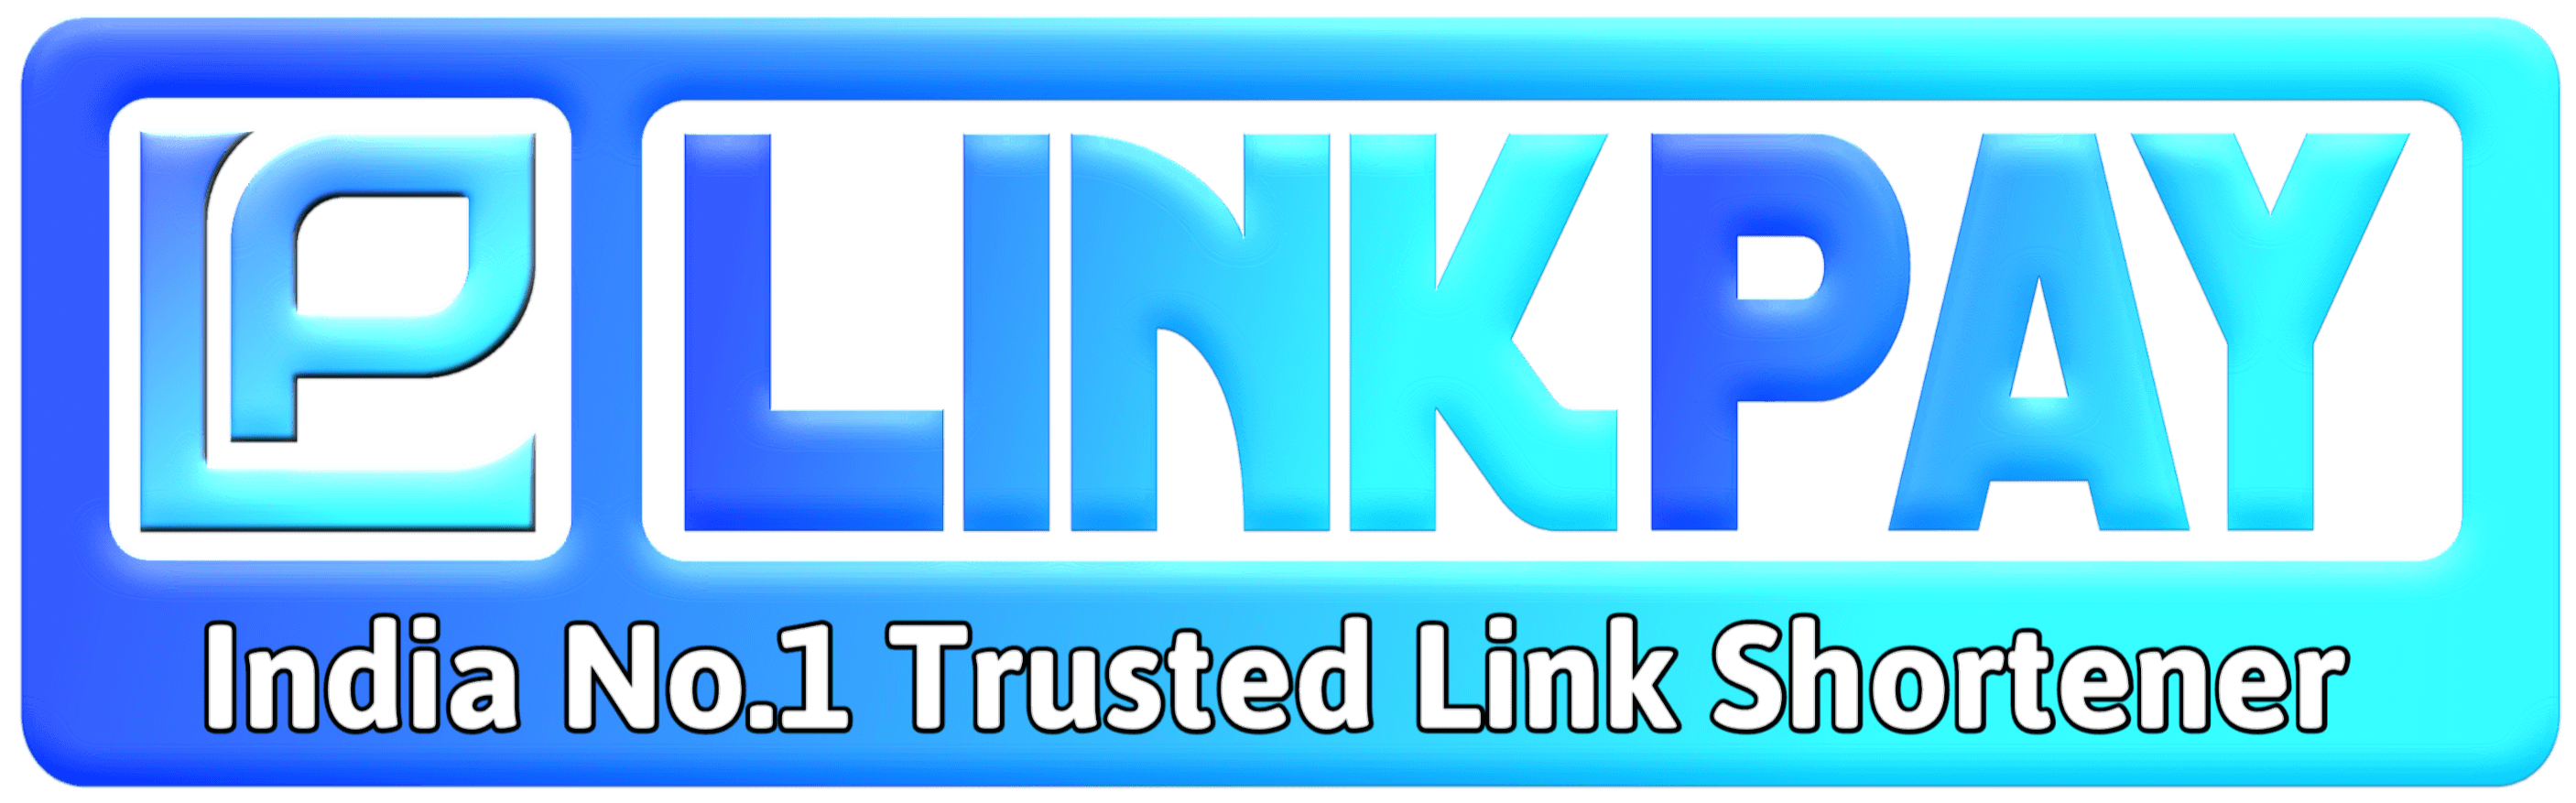 LinkPay India No.1 Trusted Link Shortener